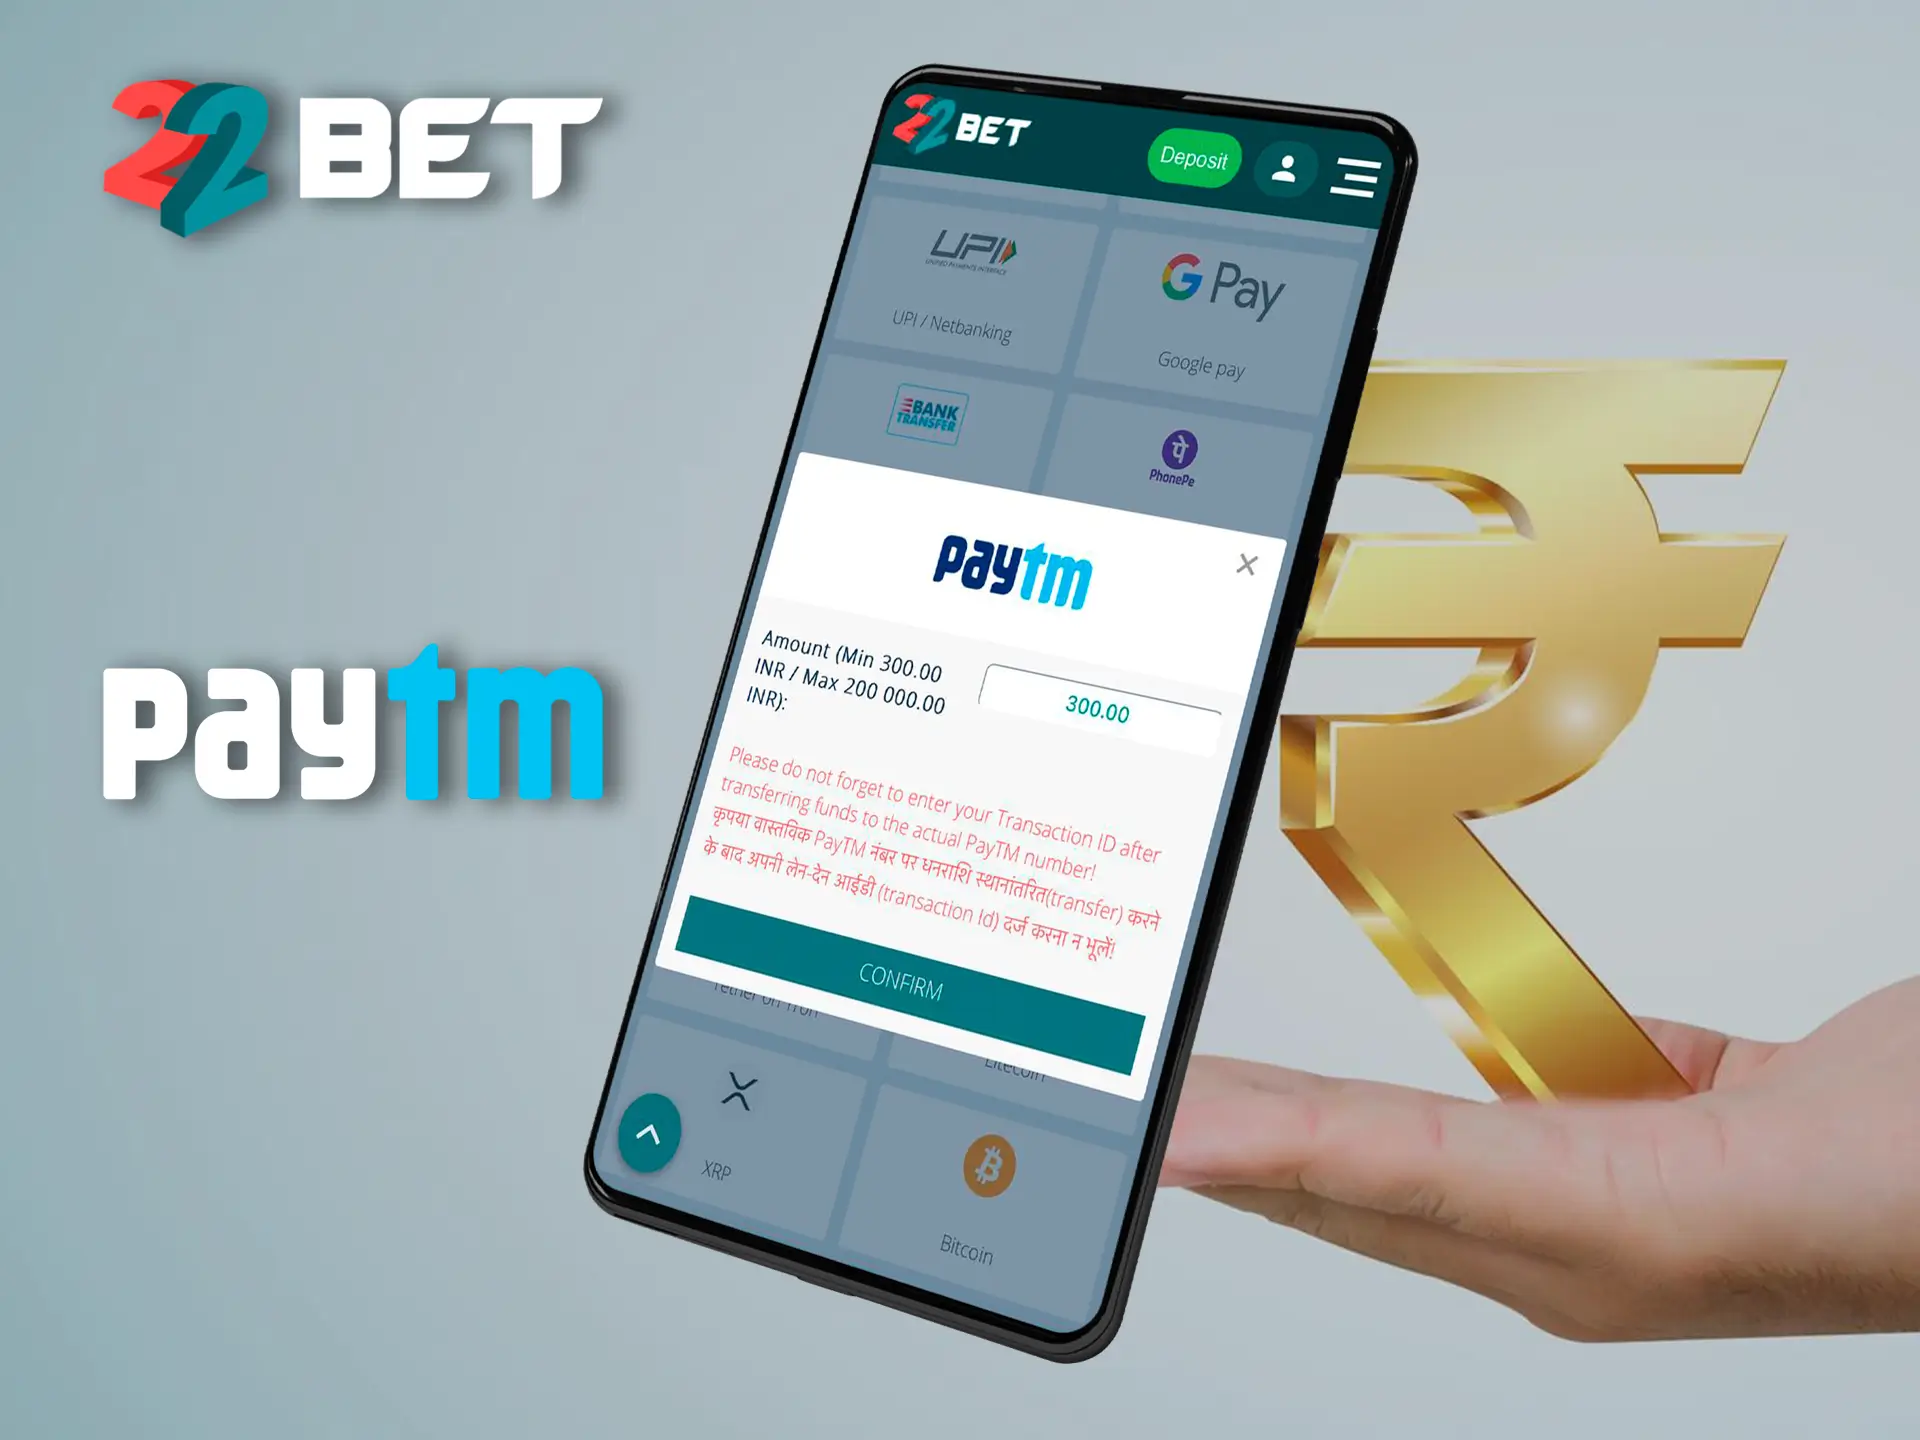 At 22Bet Casino, the PayTm payment system is available around the clock.